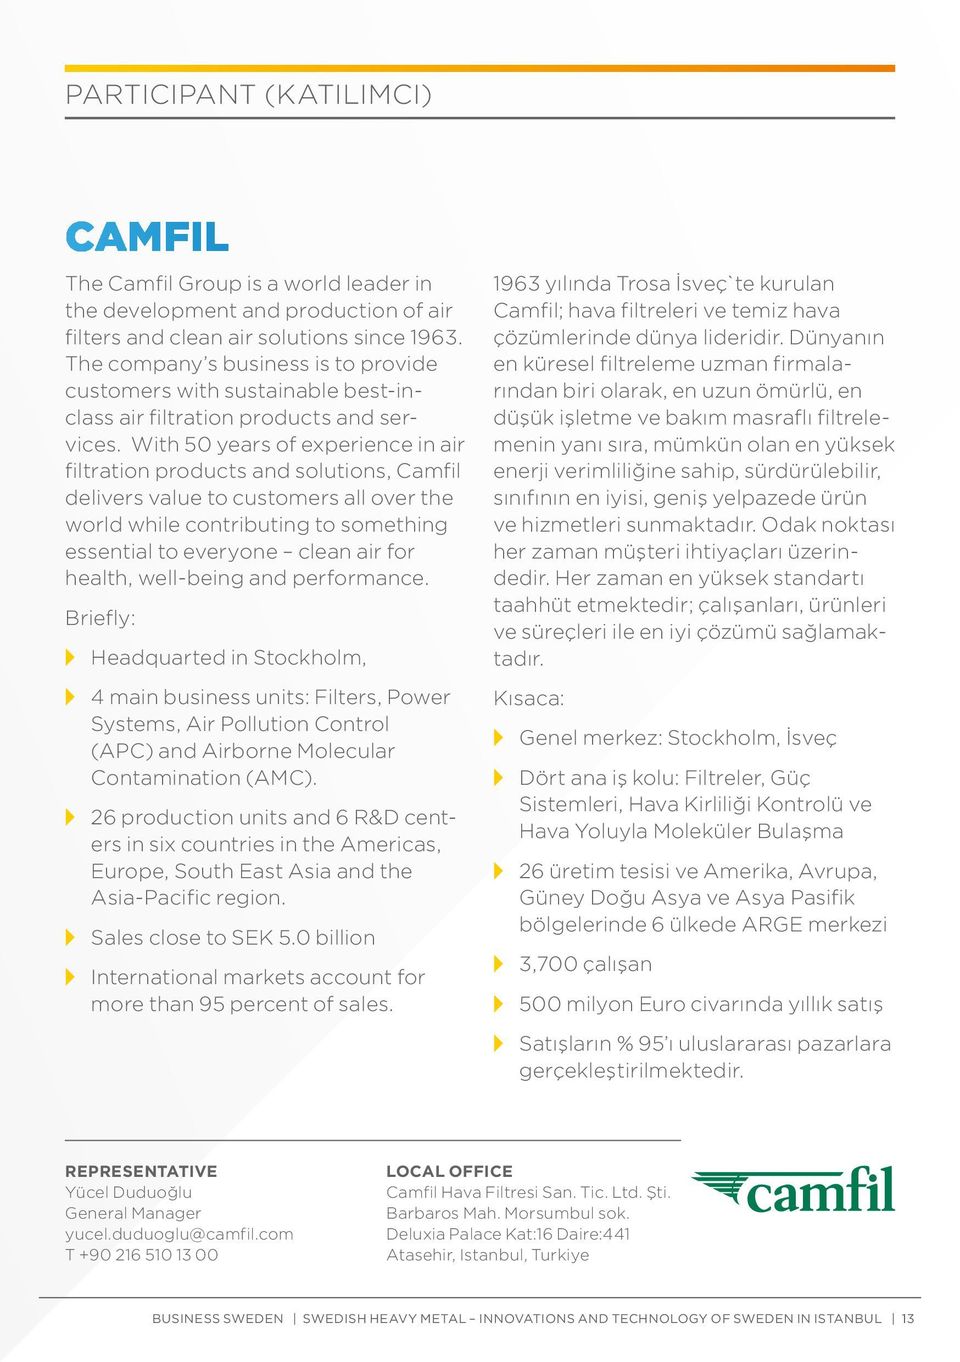 With 50 years of experience in air filtration products and solutions, Camfil delivers value to customers all over the world while contributing to something essential to everyone clean air for health,